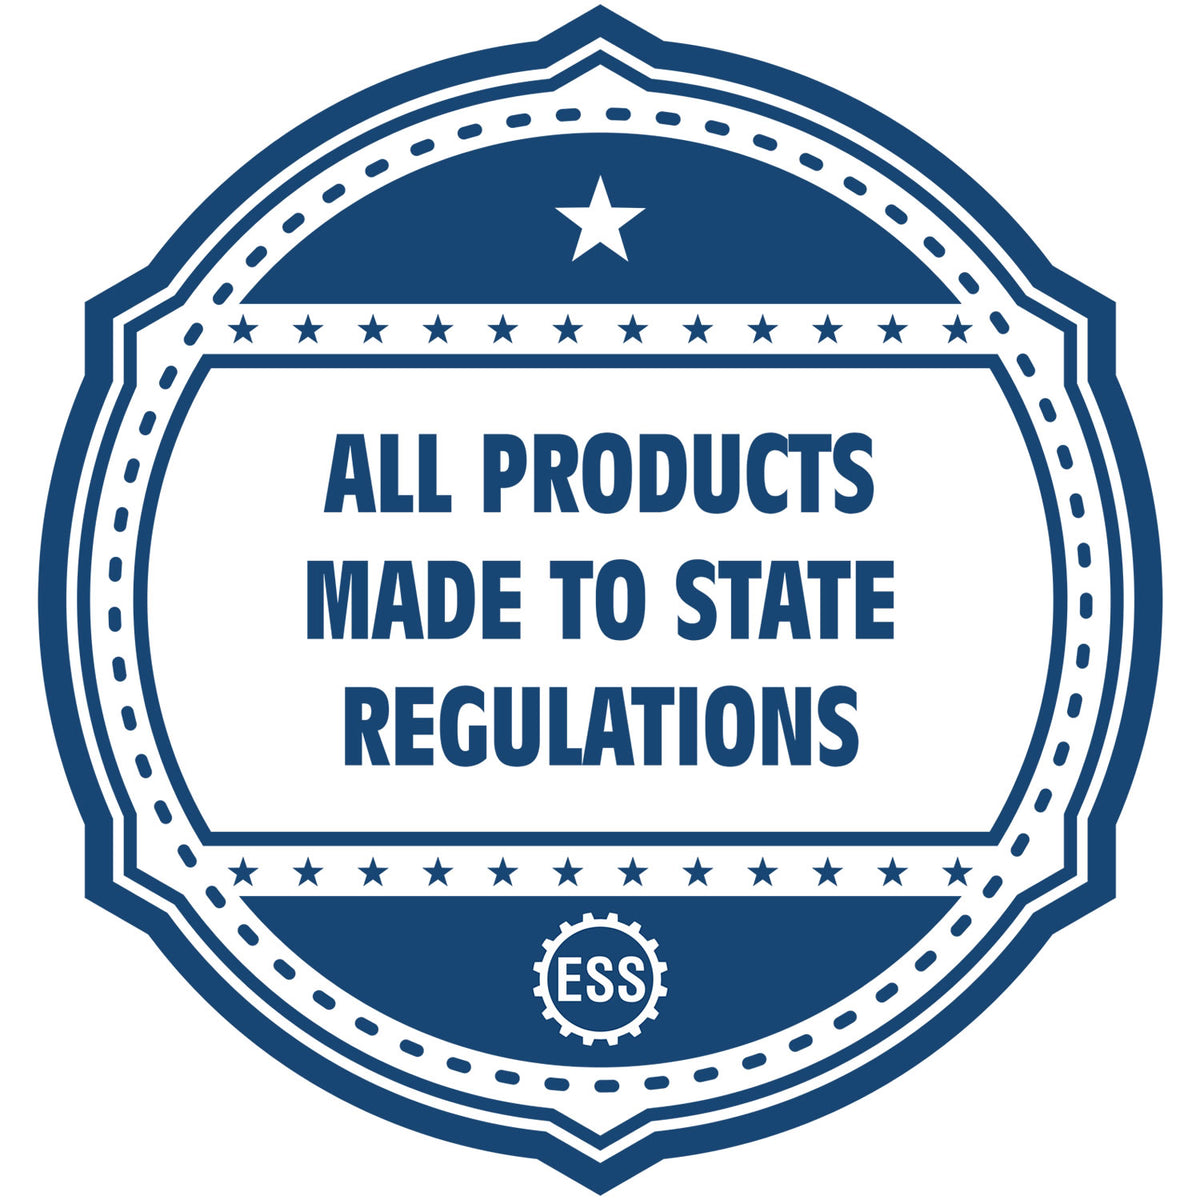 A blue icon or badge for the Gift Idaho Engineer Seal showing that this product is made in compliance with state regulations.